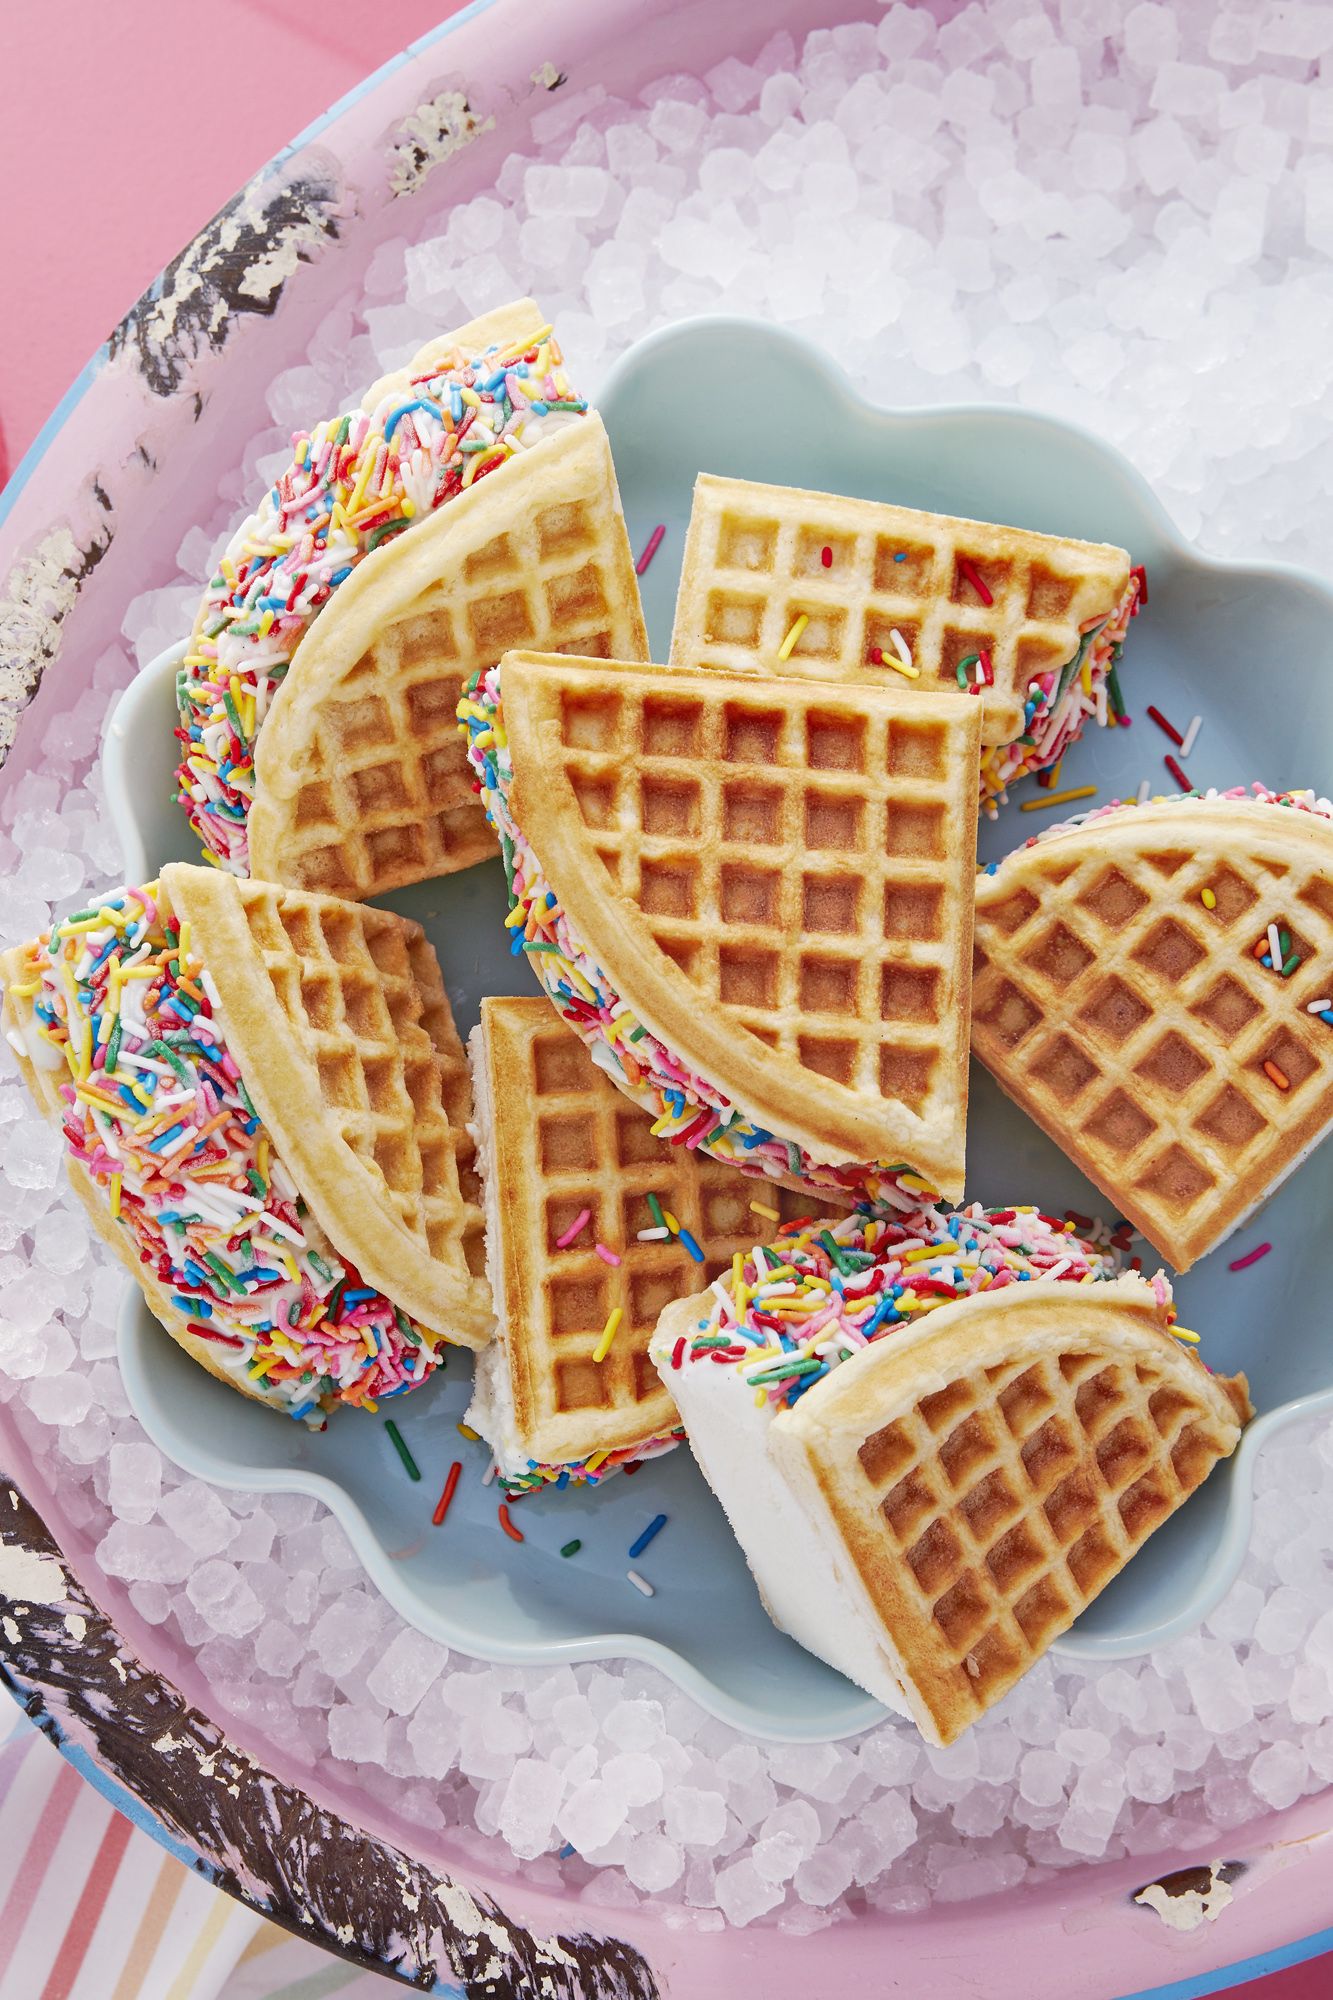 20 Of The Most Delicious Things You Can Make In A Waffle Iron